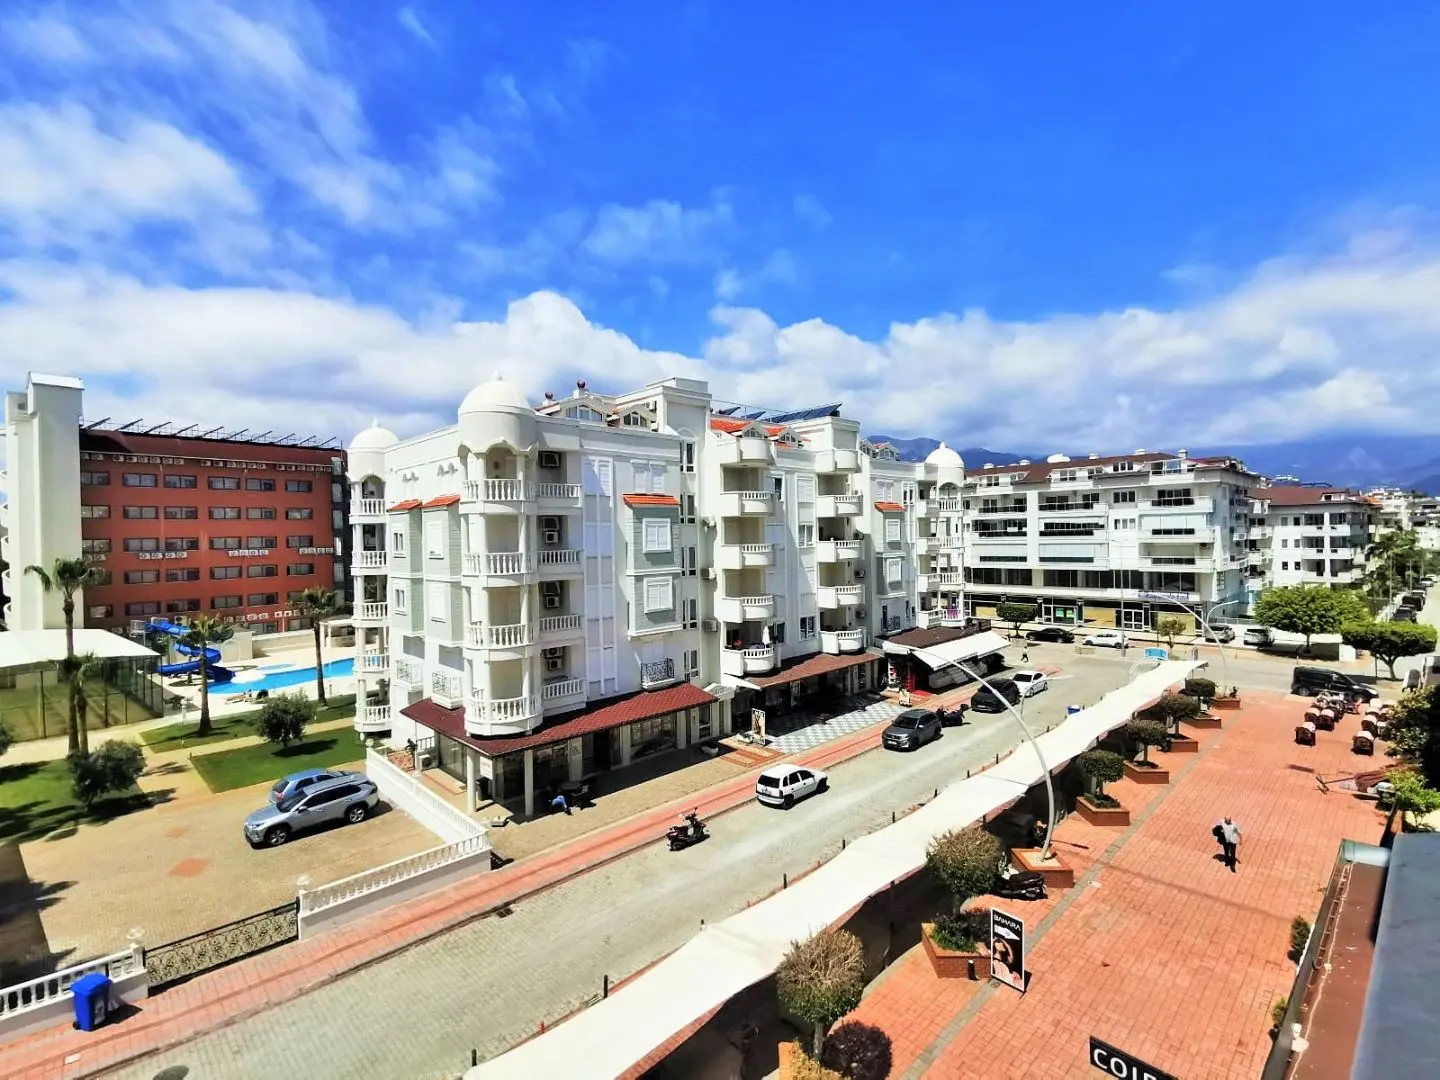 2+1 FURNISHED FLAT IN ALANYA OBA, 80 METERS FROM THE SEA